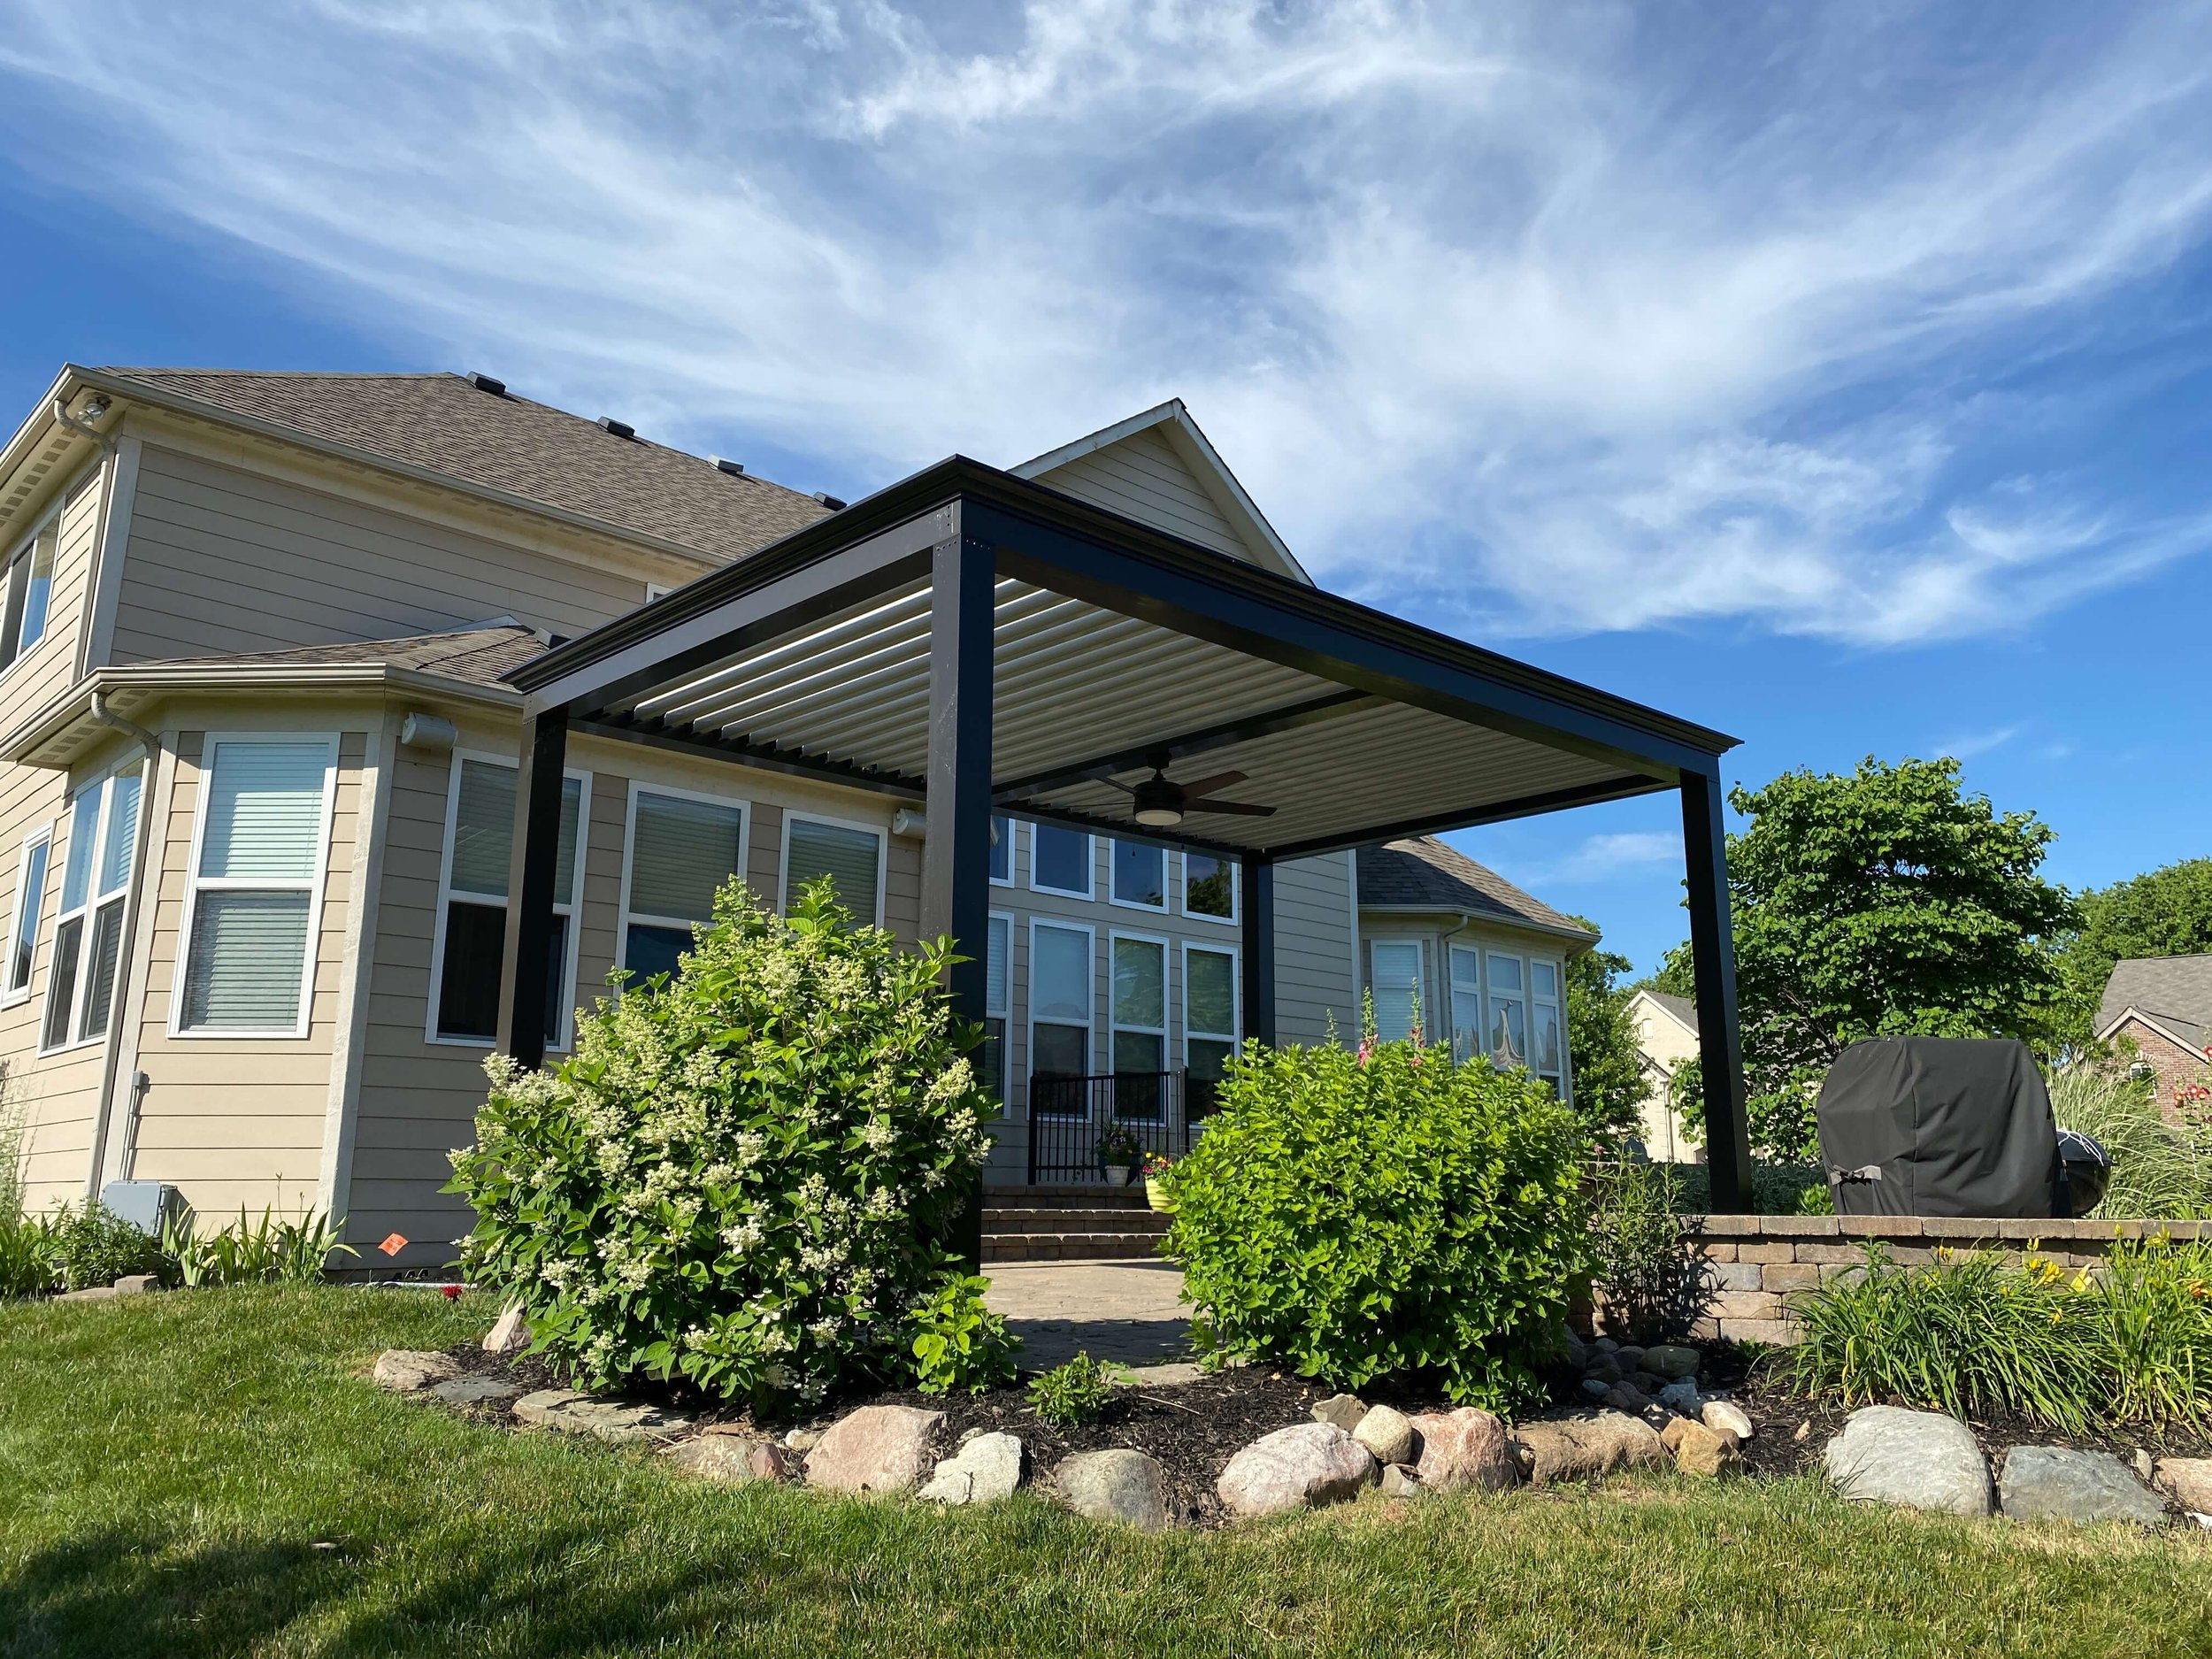 Patio covers with fan for relaxation and comfort.  Great entertainment space!